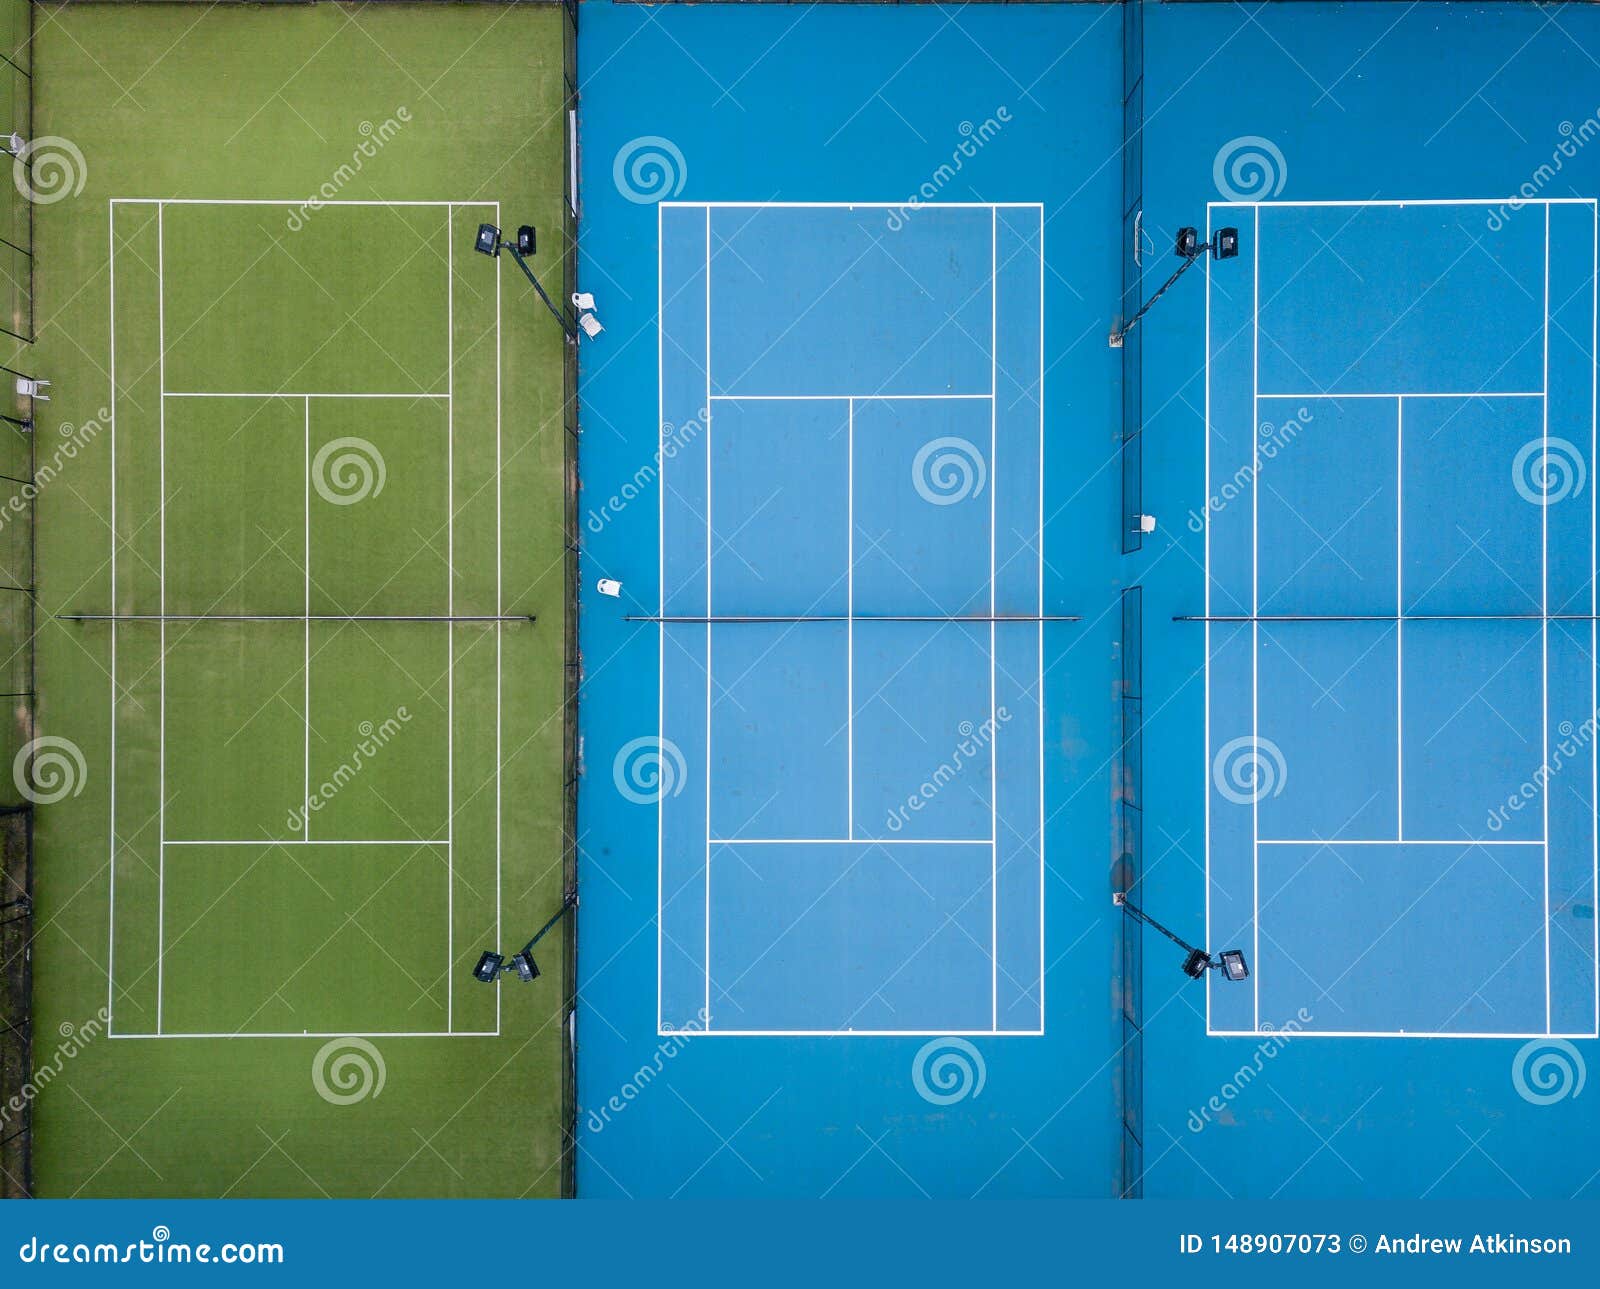 Aerial Shot of Three Tennis Courts Side by Side Stock Image - Image of ...